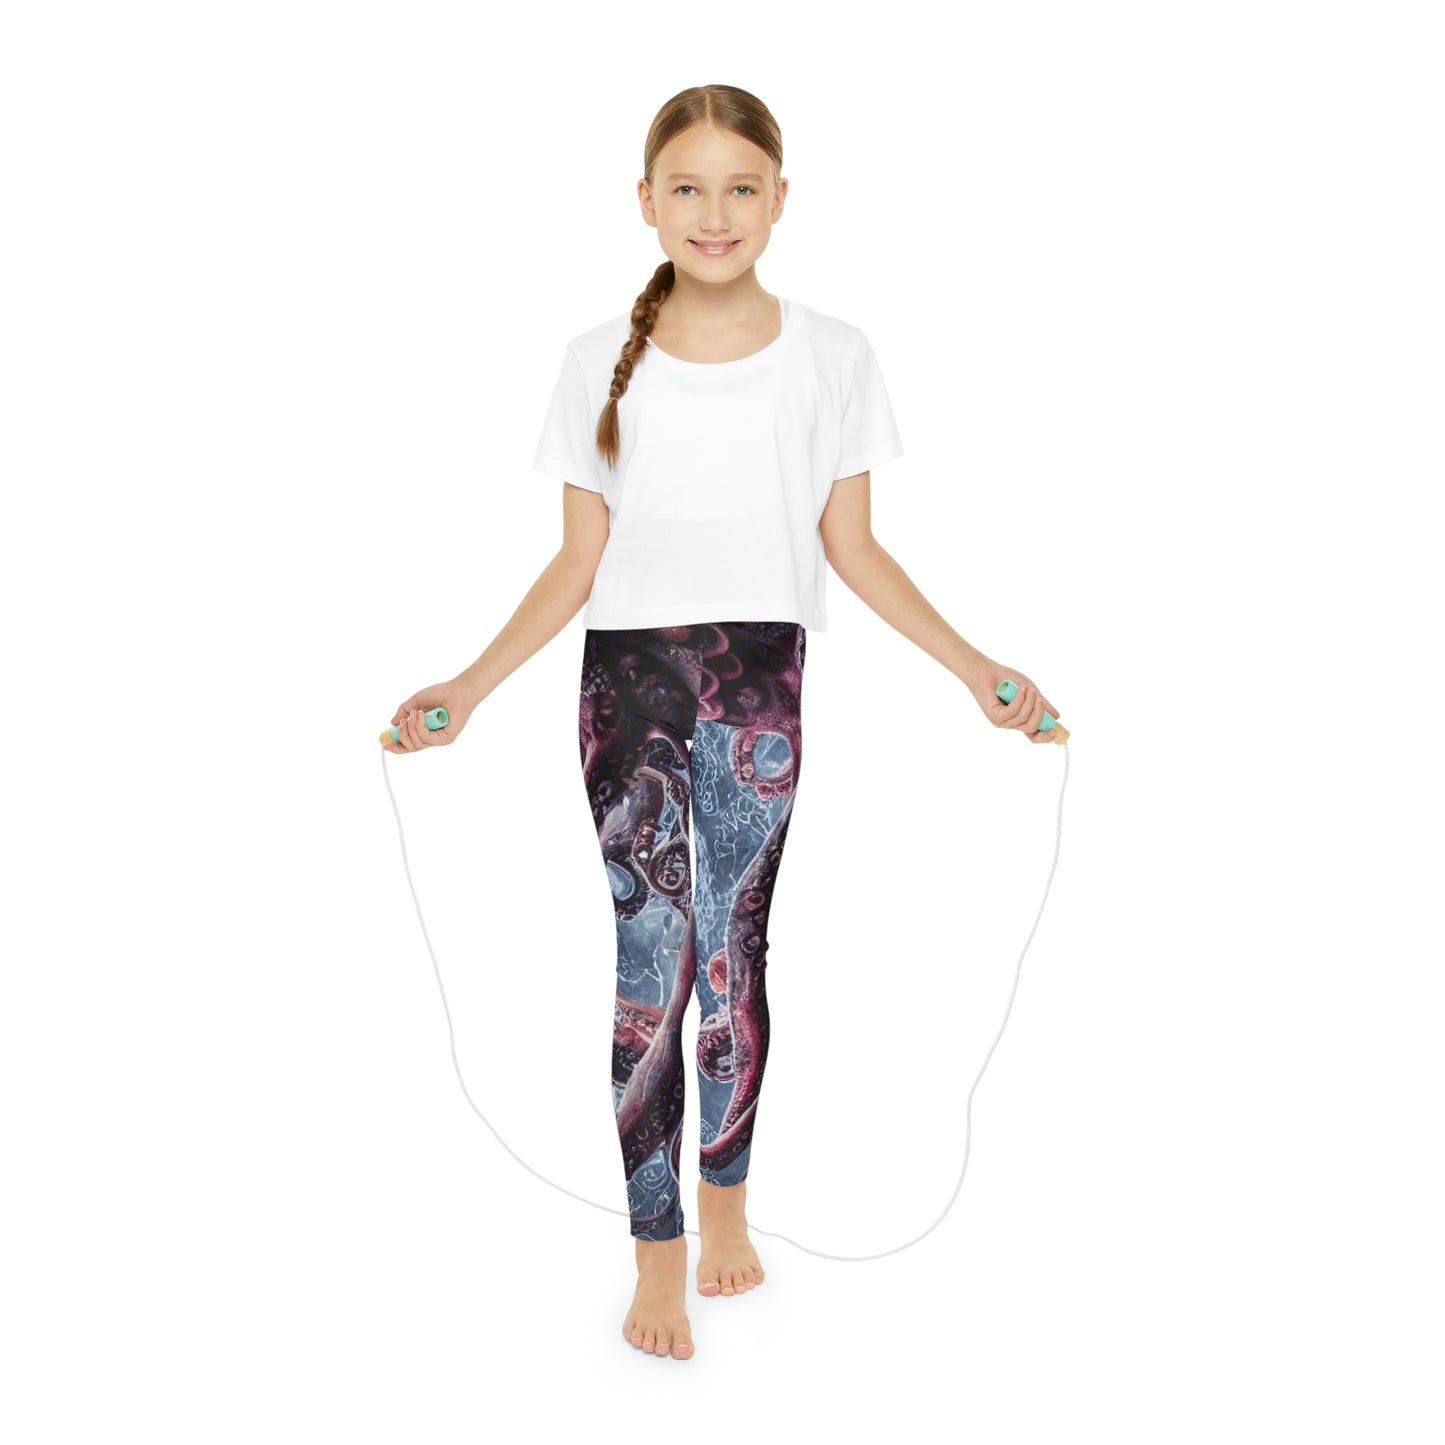 Octopus Beach Youth Leggings, One of a Kind Gift - Unique Workout Activewear tights for kids fitness, Daughter, Niece Christmas Gift